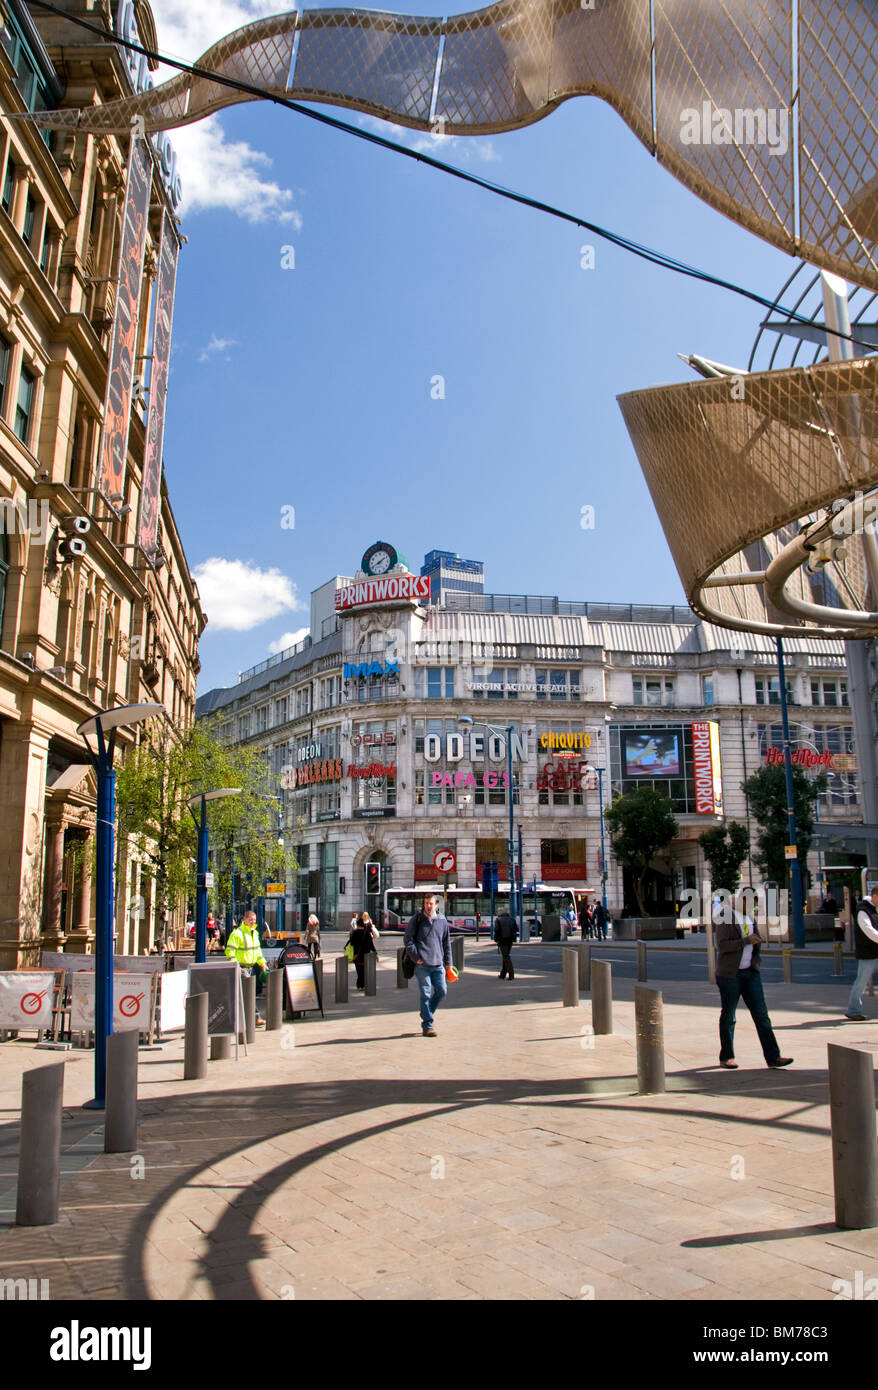 Der Blick in Richtung Corporation Street ab Exchange Square in Manchester City Centre, England, UK Stockfoto